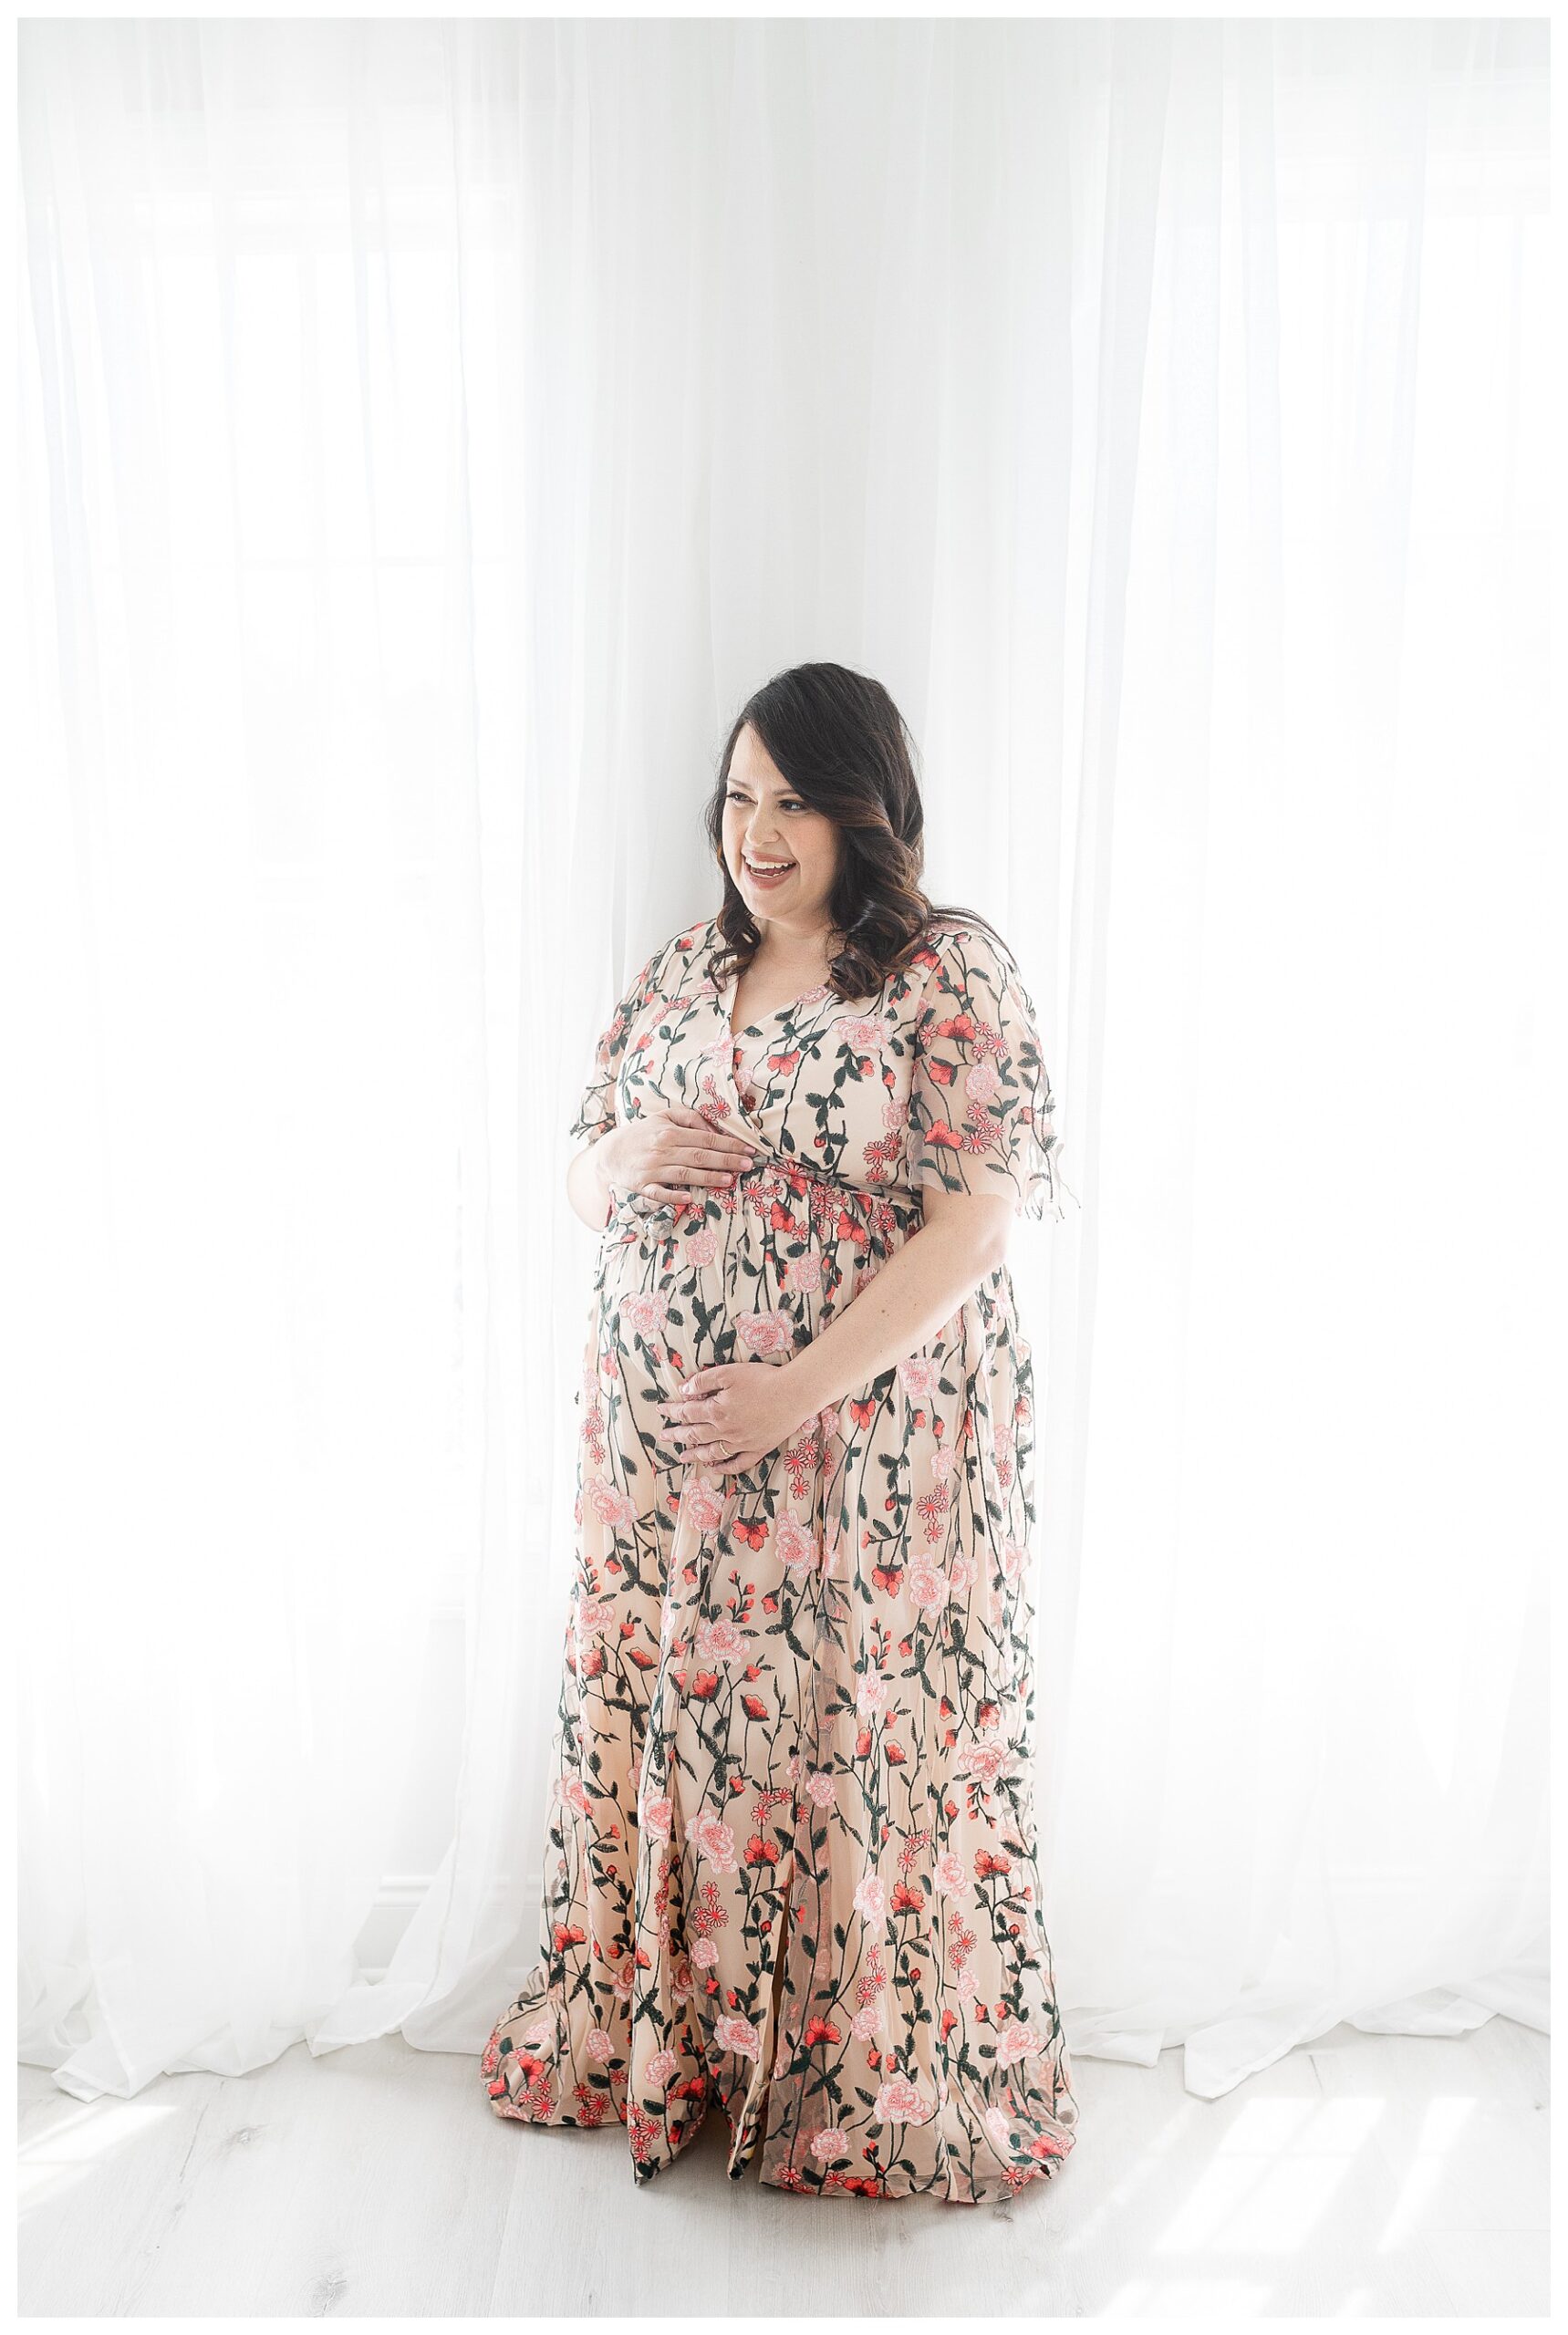 Pregnant mother cradling her belly for maternity photos.